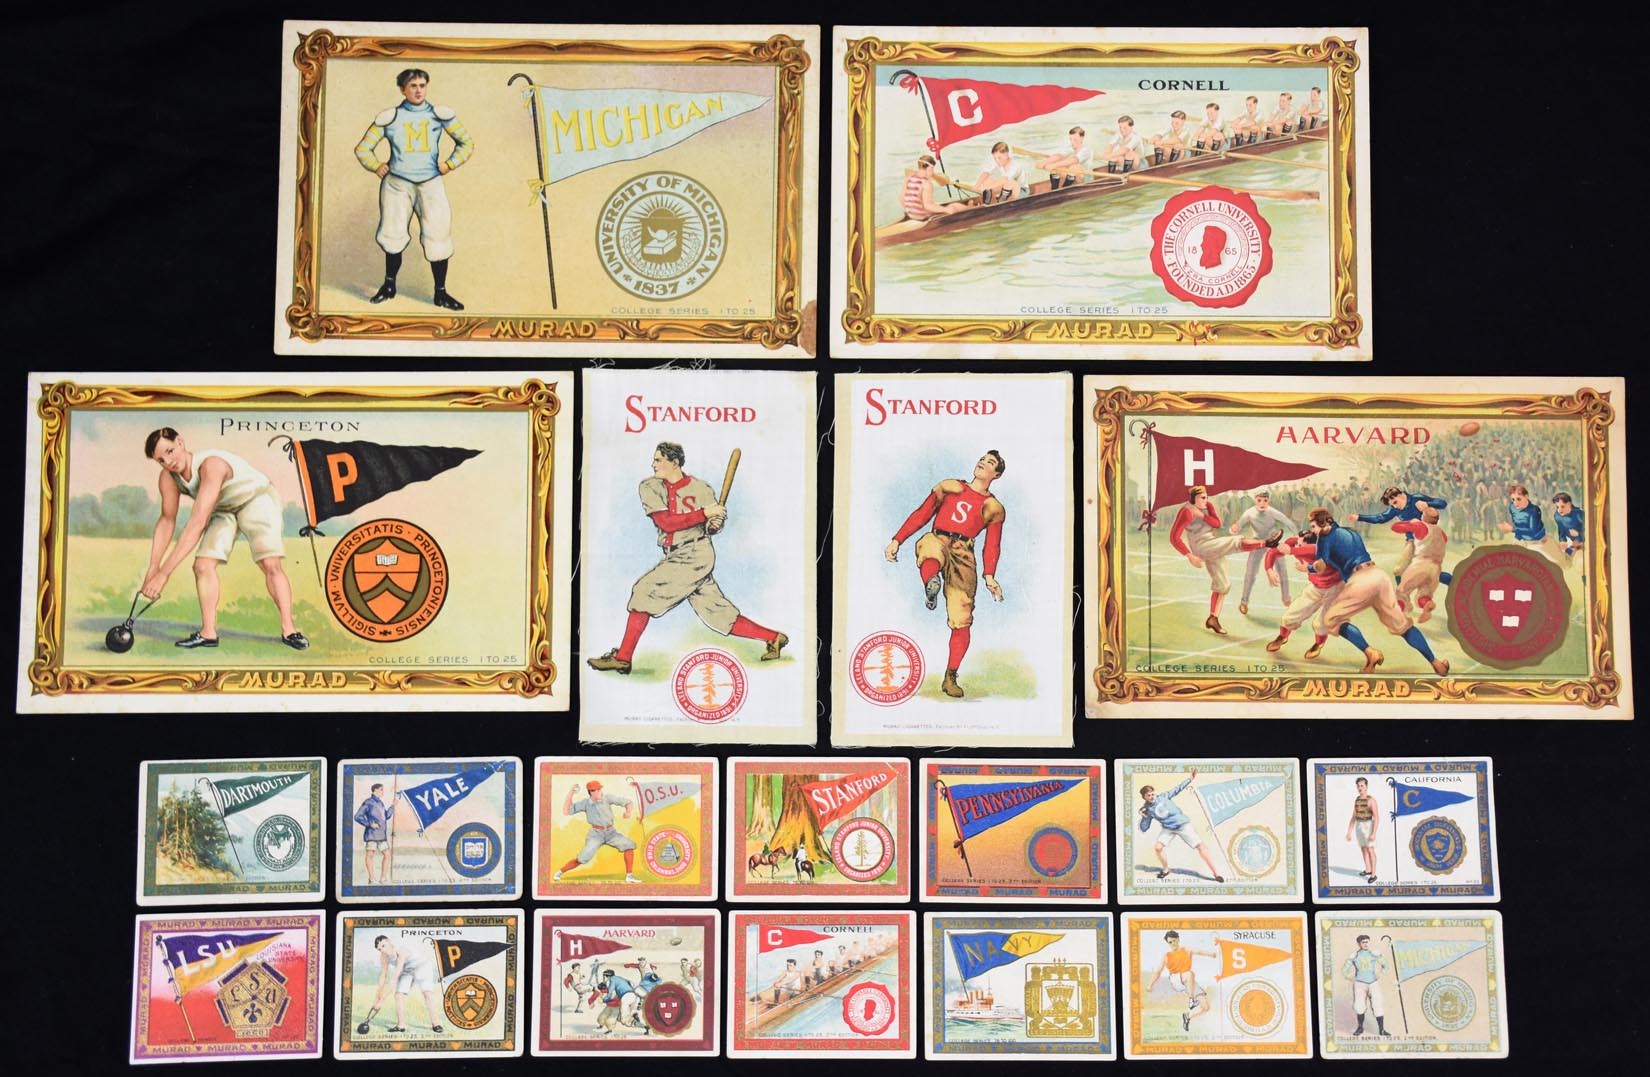 Baseball and Trading Cards - 1909-1910 Old Murad College Series T51 & T6 Cabinets Near Complete Sets (202/228)